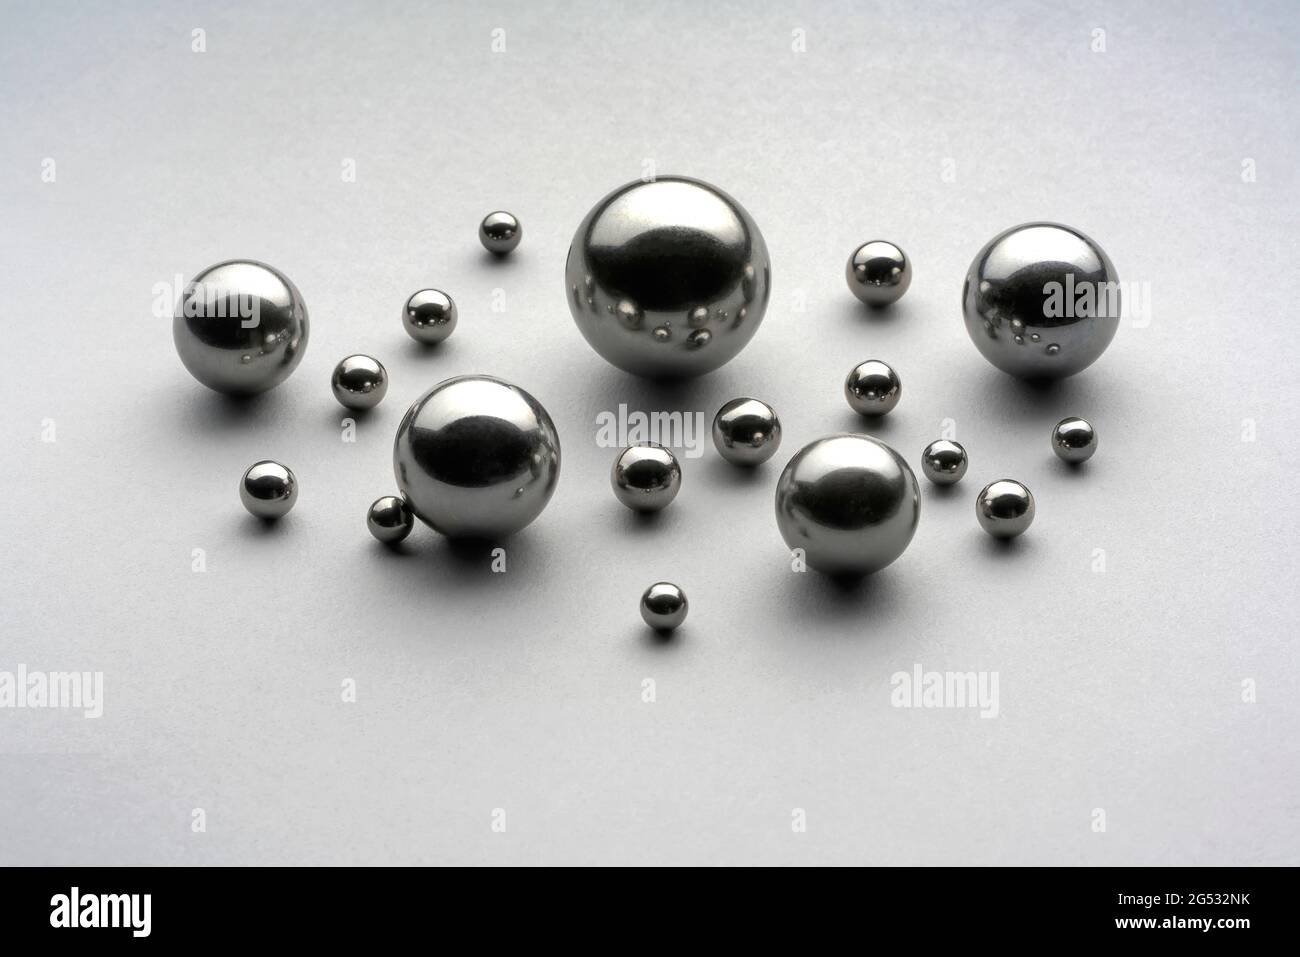 Close up top view showing group of assorted steel balls used as components  in industrial bearings displayed on grey background Stock Photo - Alamy